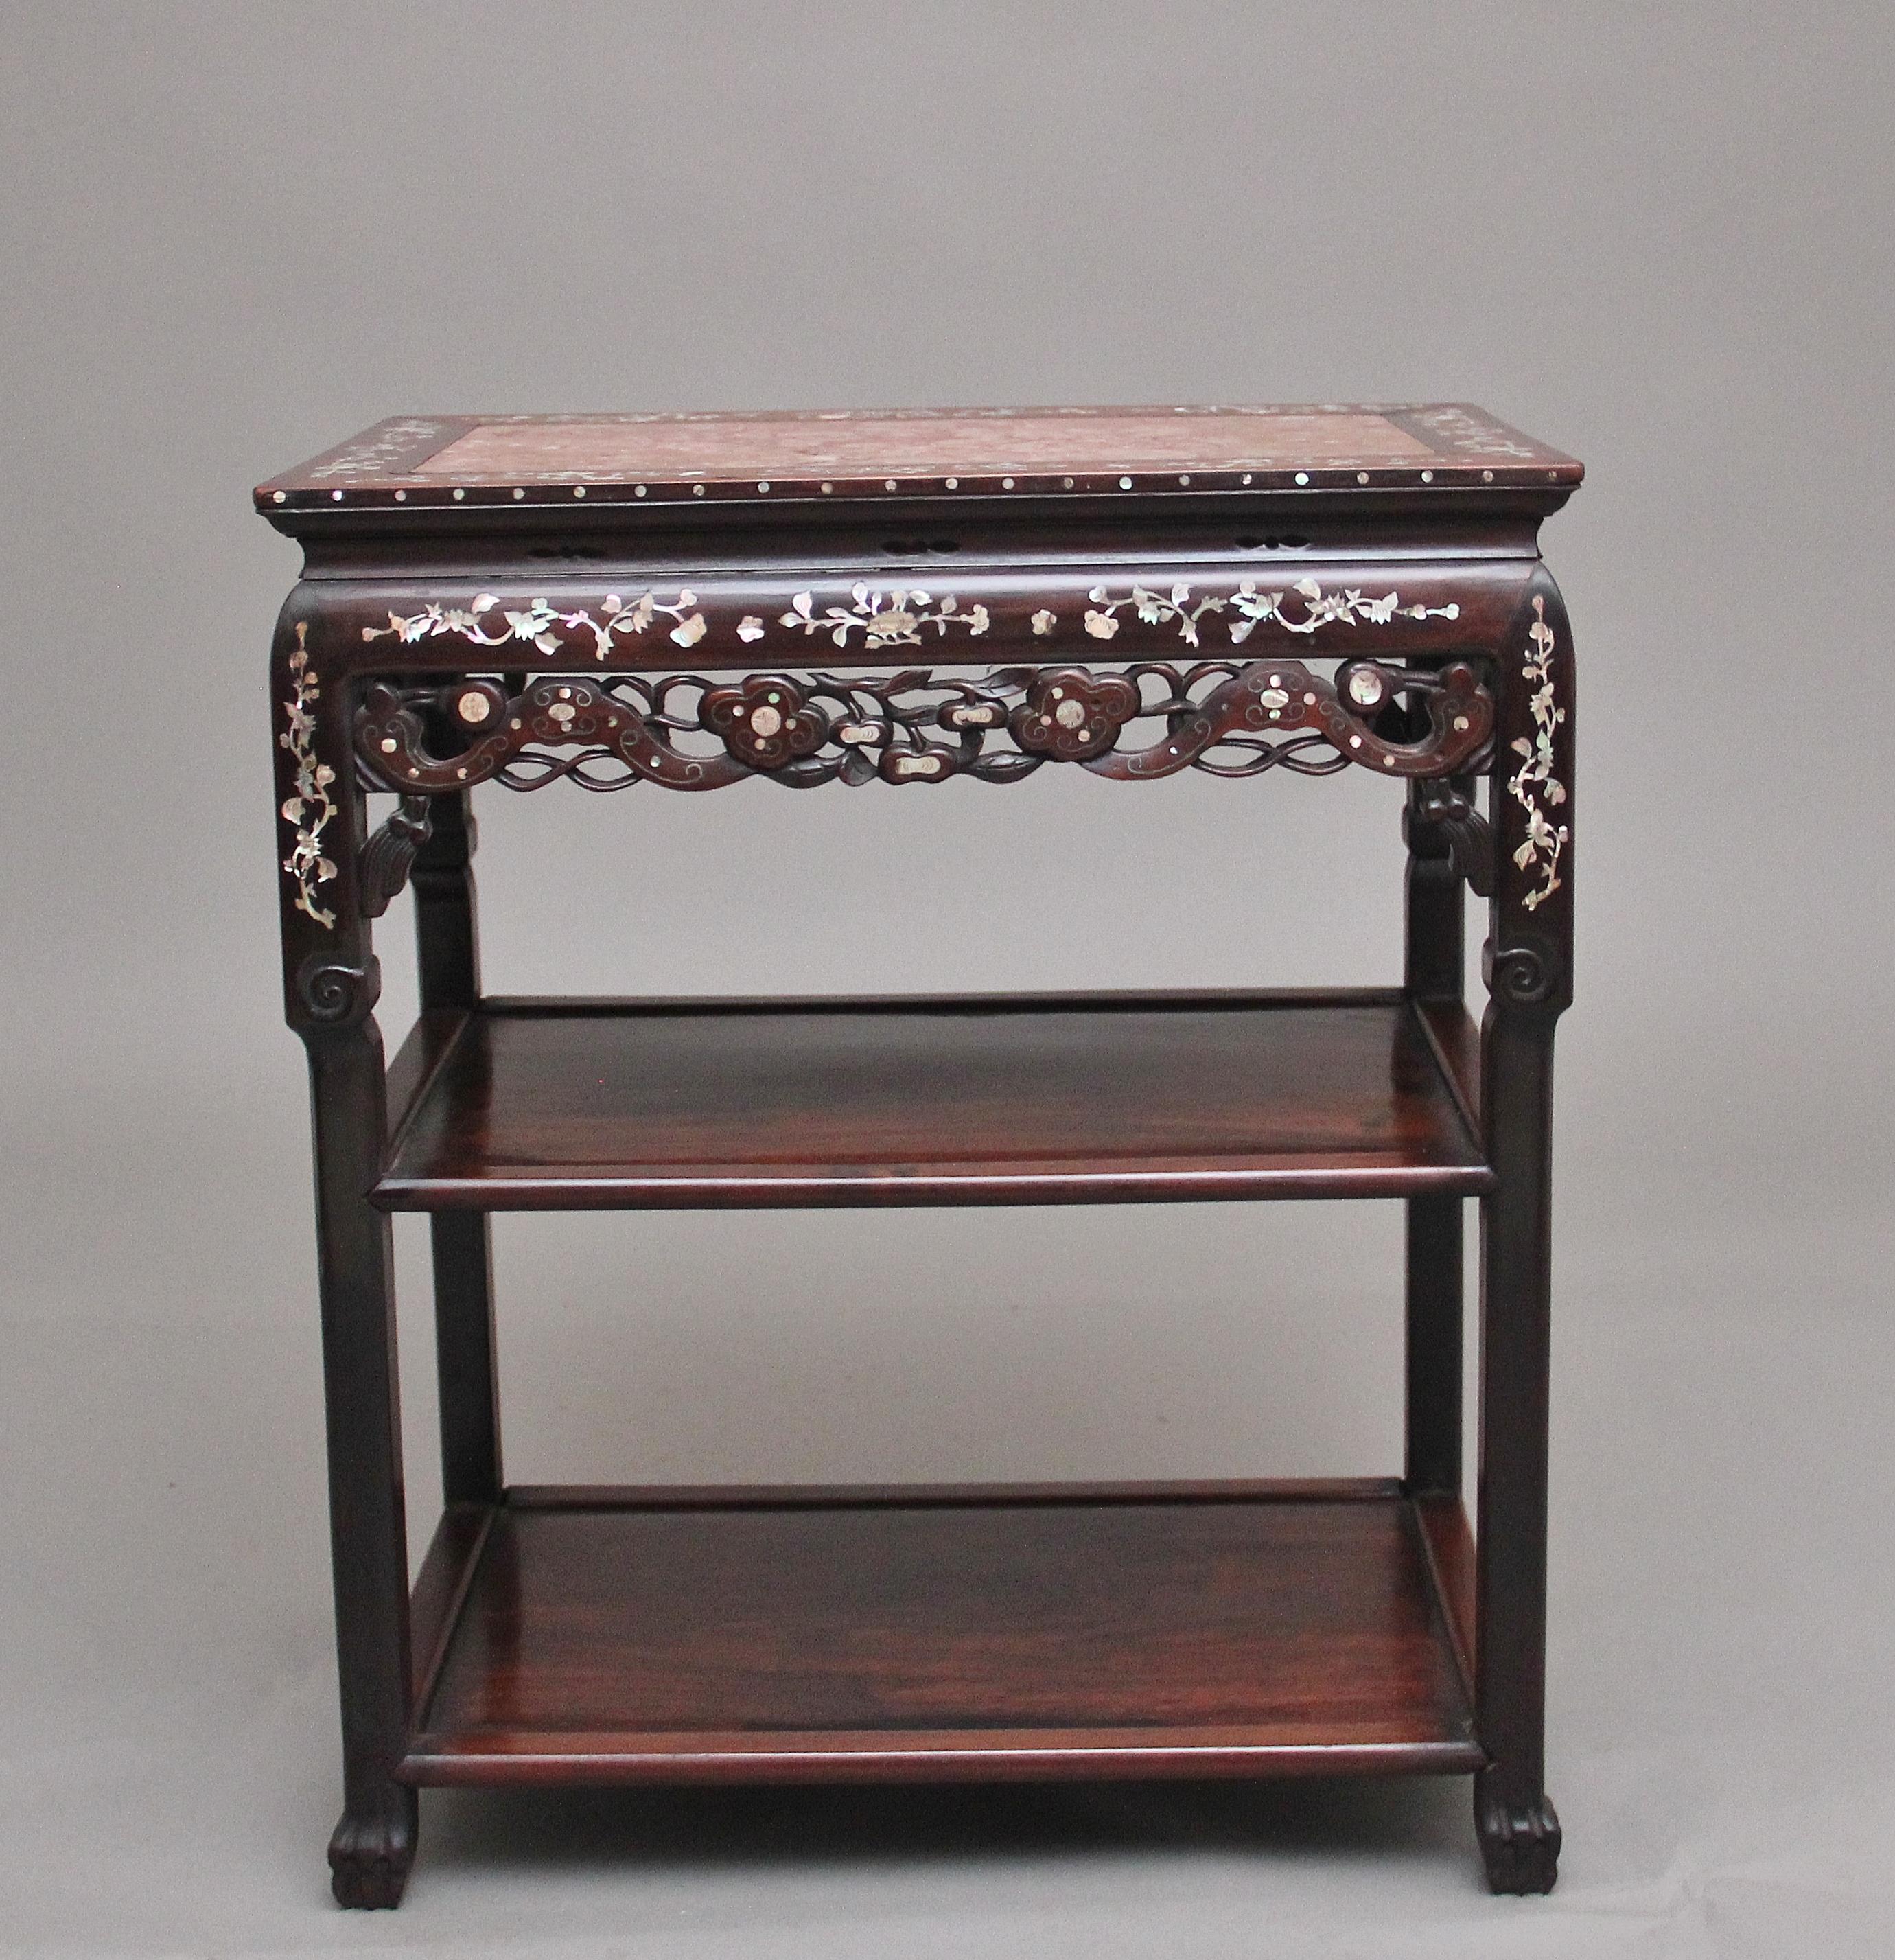 A lovely quality freestanding 19th century Chinese three tier occasional table, the rectangular top inset with a rouge marble panel, the hardwood border of the top profusely inlaid with mother of pearl floral patterns, there is also further mother